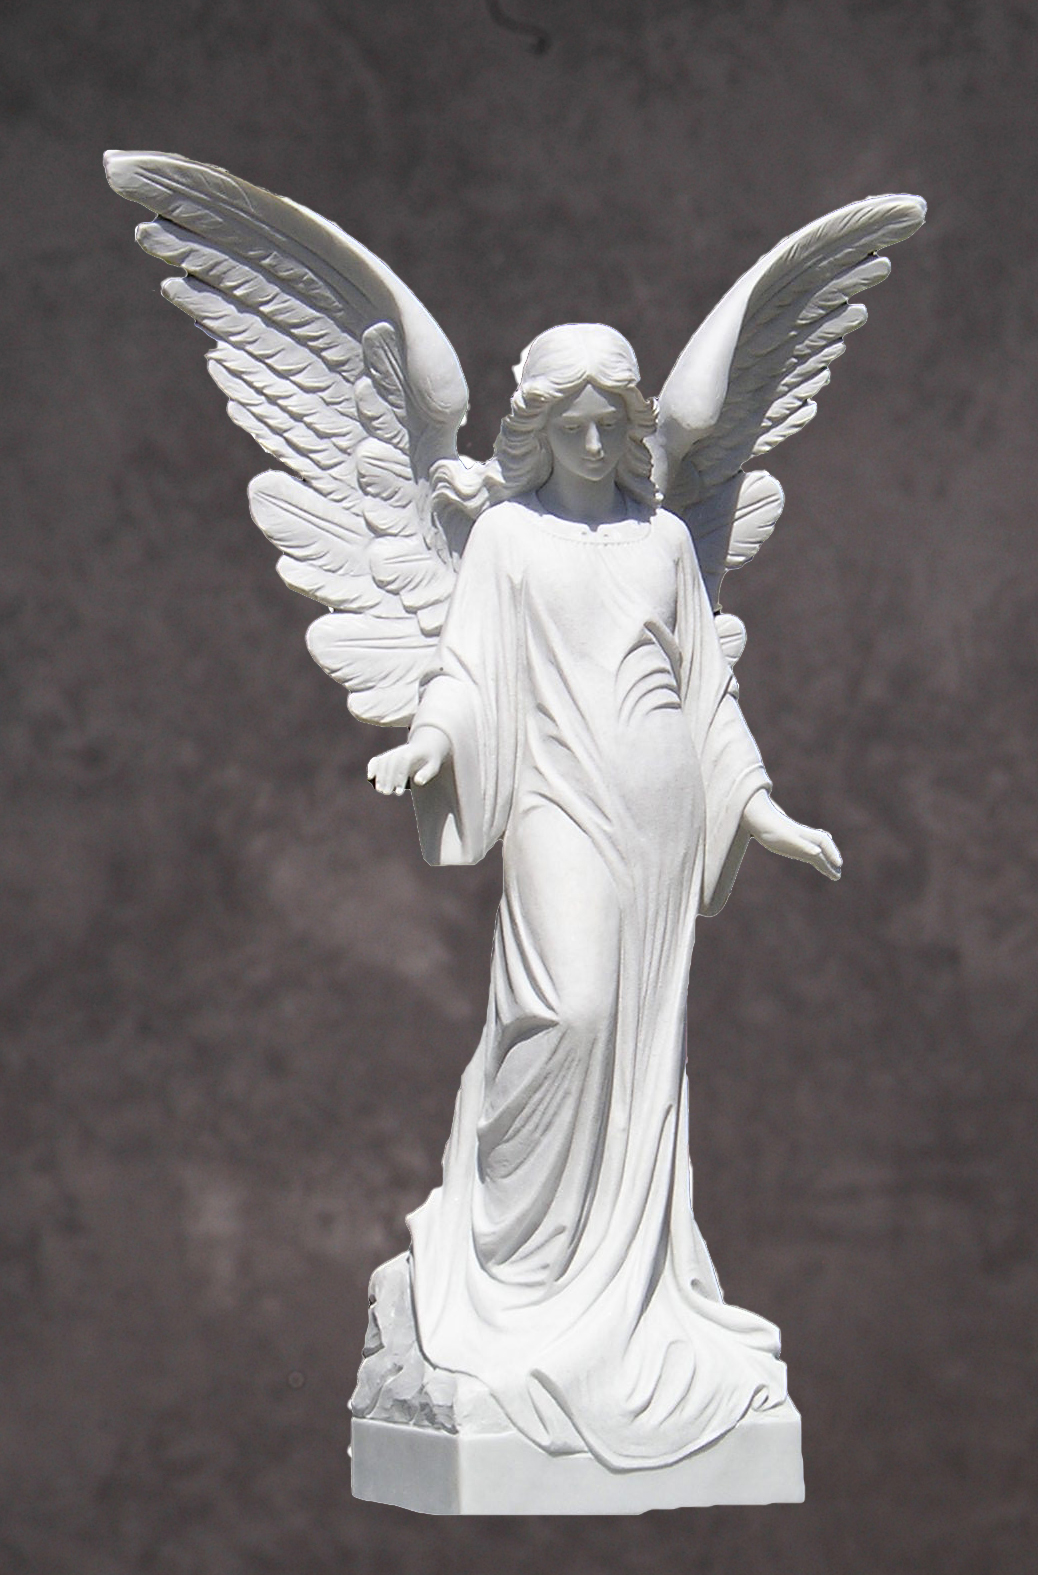 HQ Angel Statue Wallpapers | File 830.14Kb